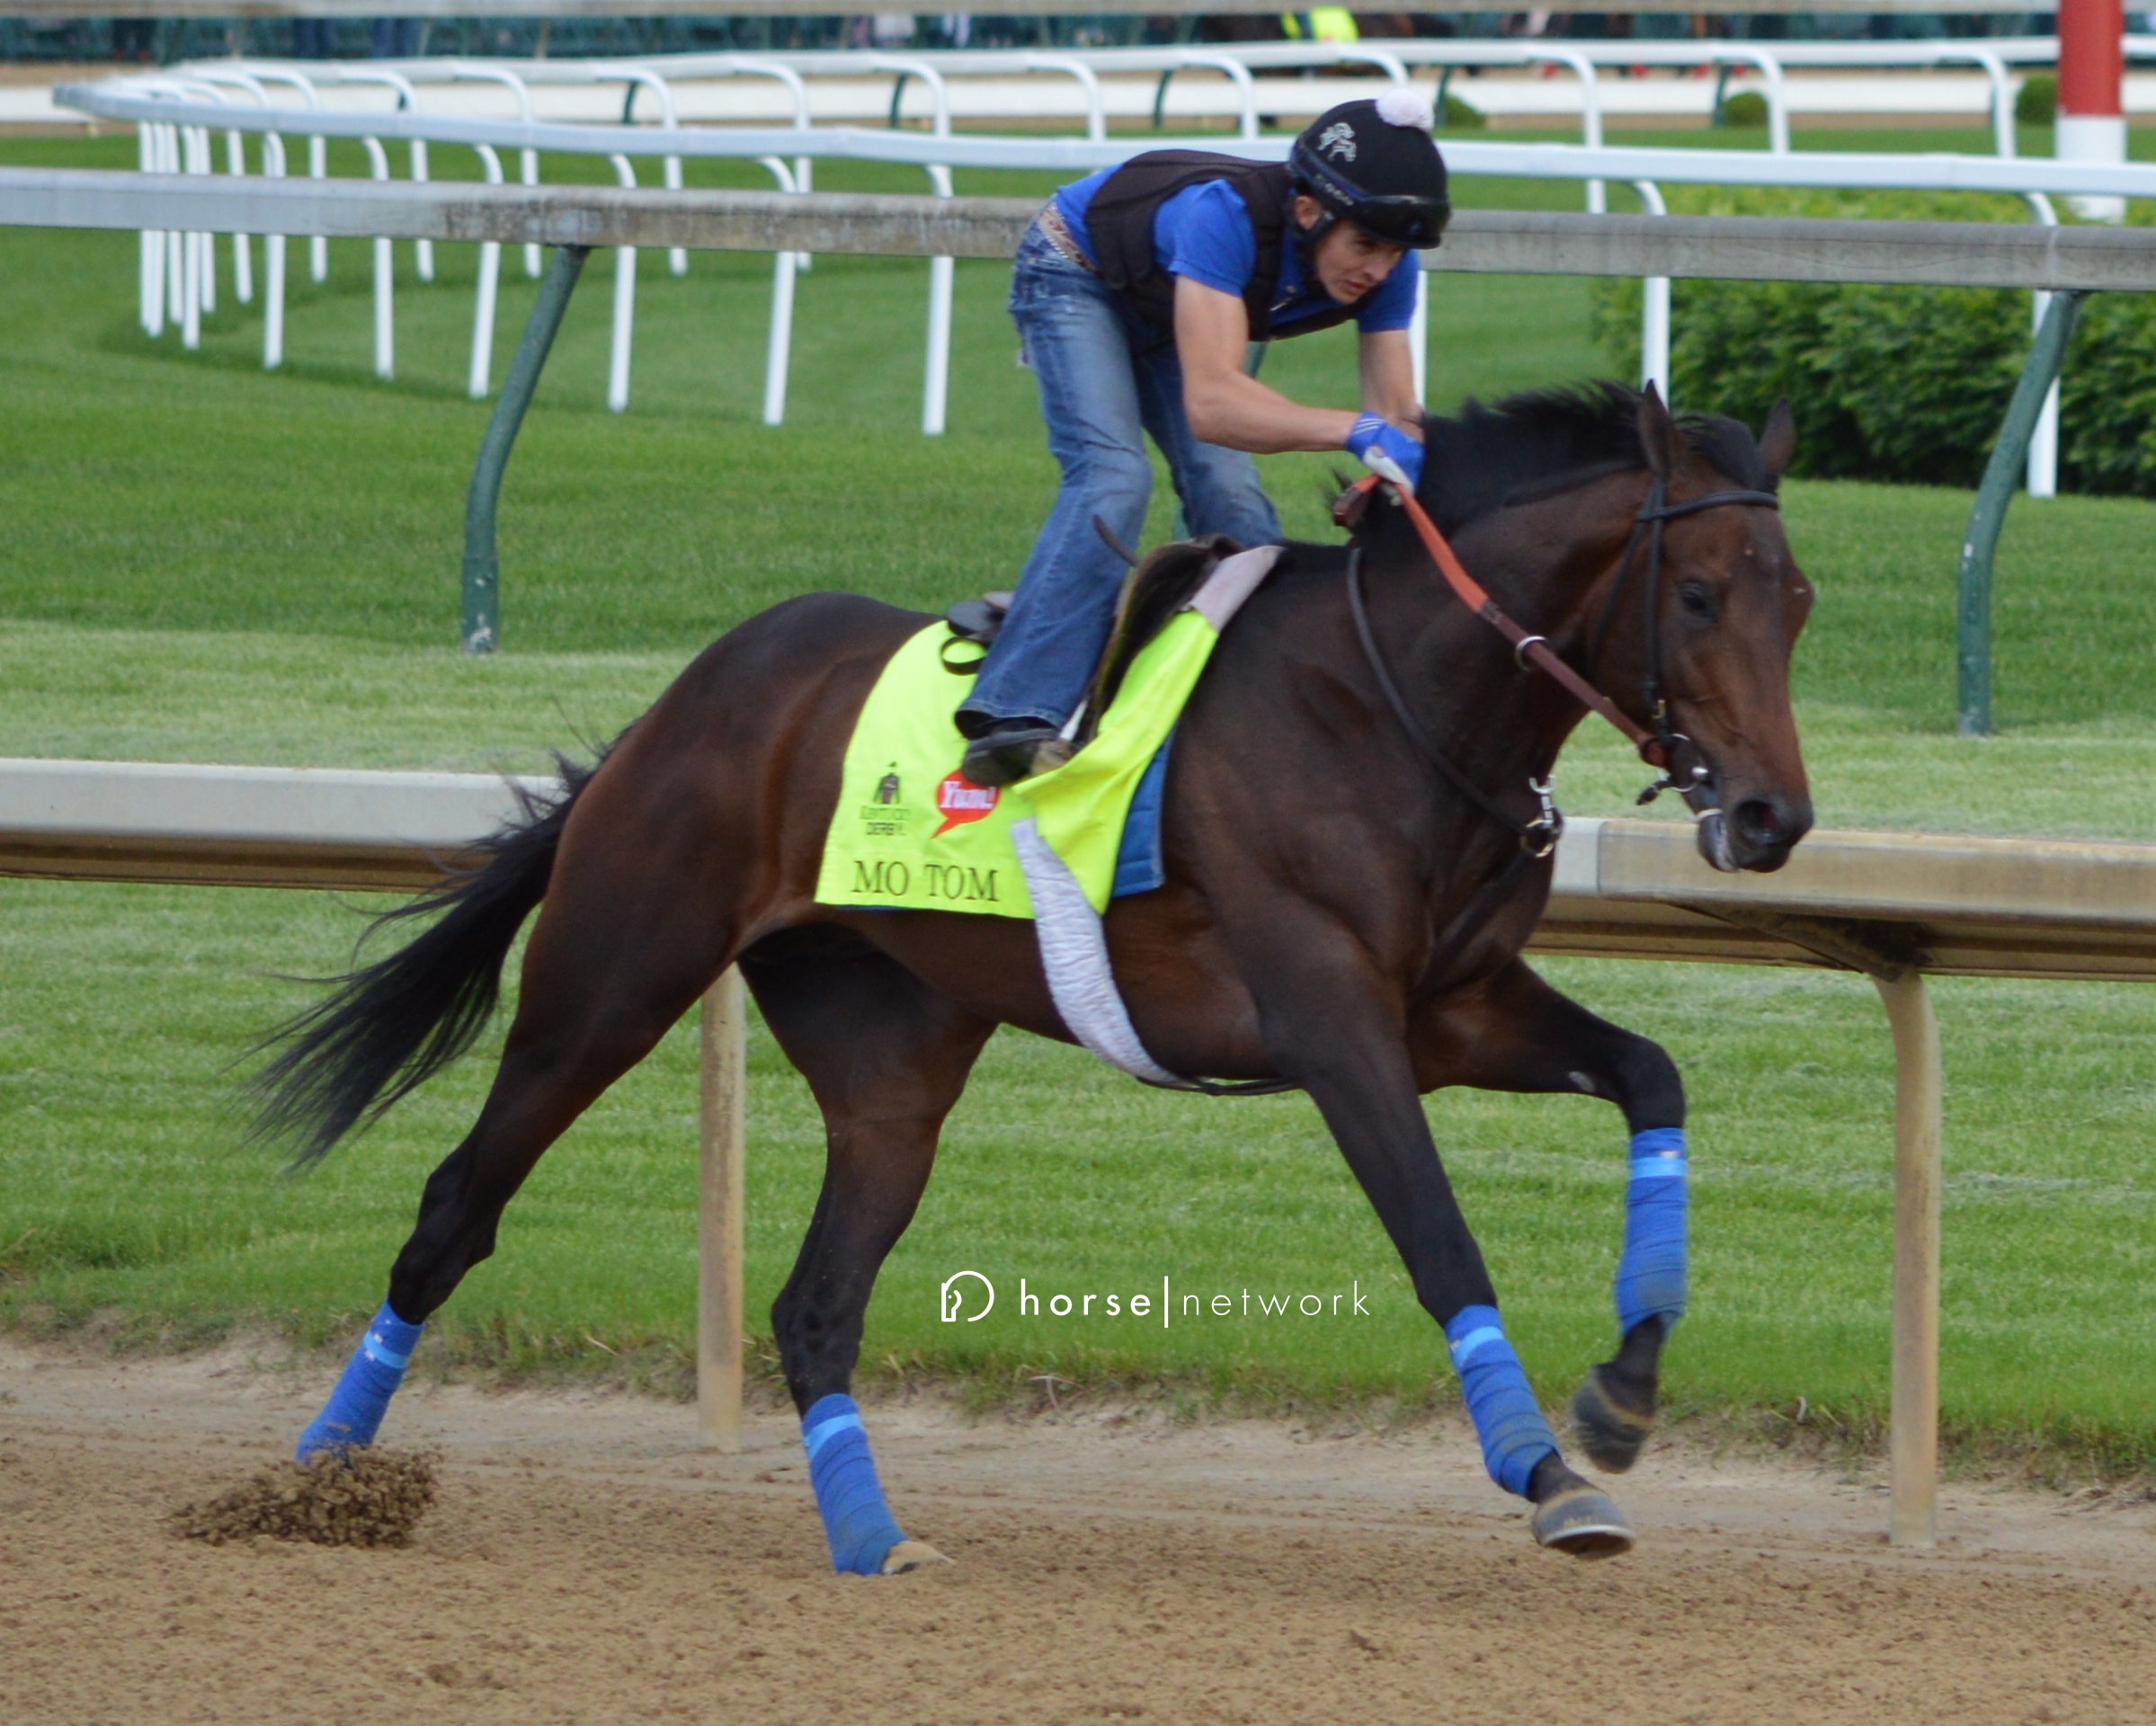 Mo Tom is dialed in in preparation for the Kentucky Derby.